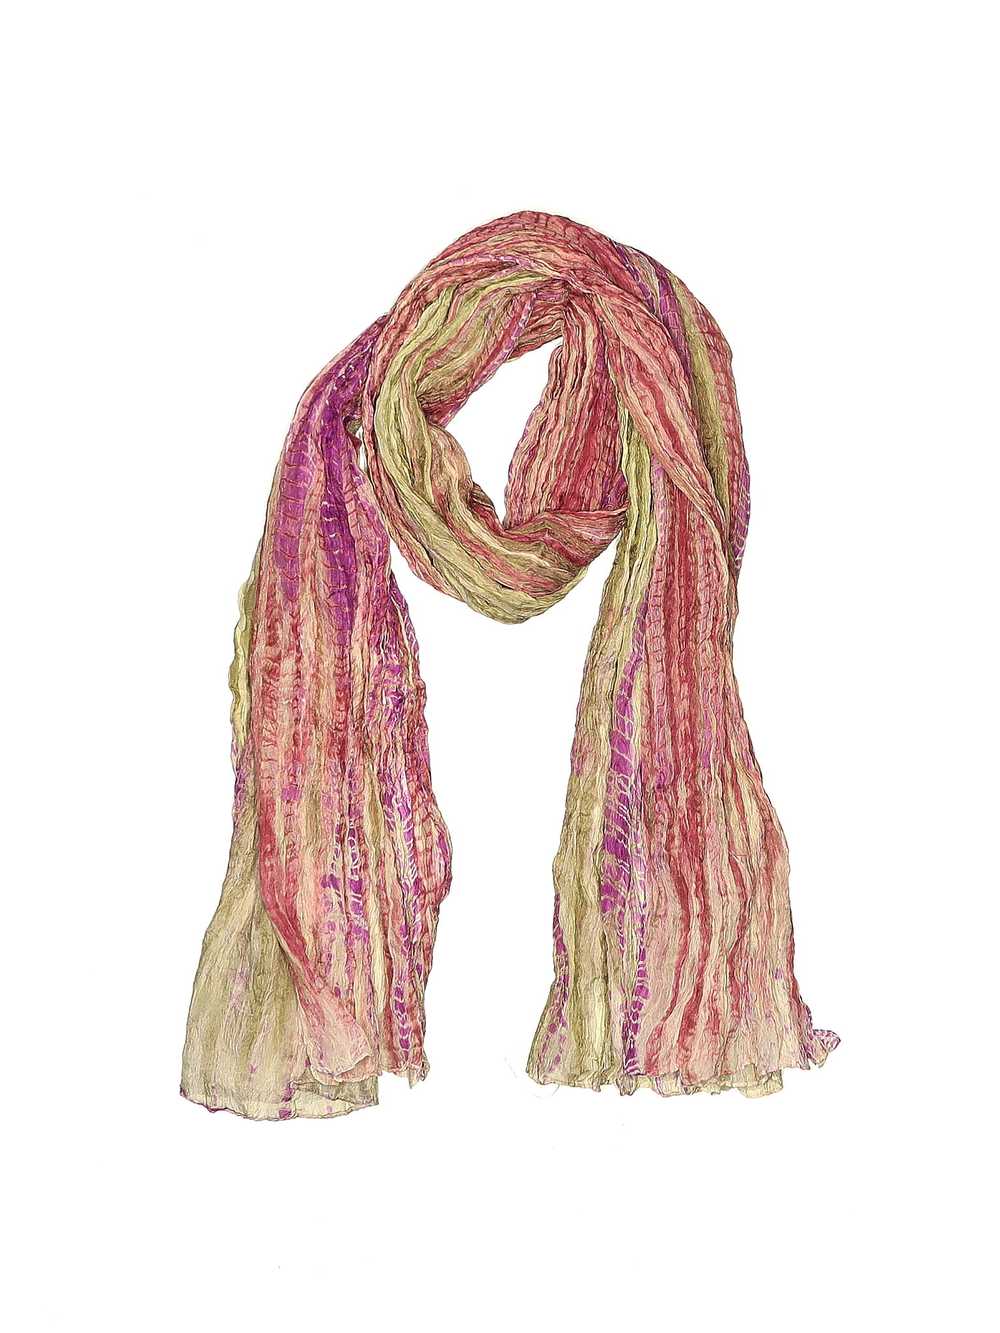 Unbranded Women Pink Scarf One Size - image 1